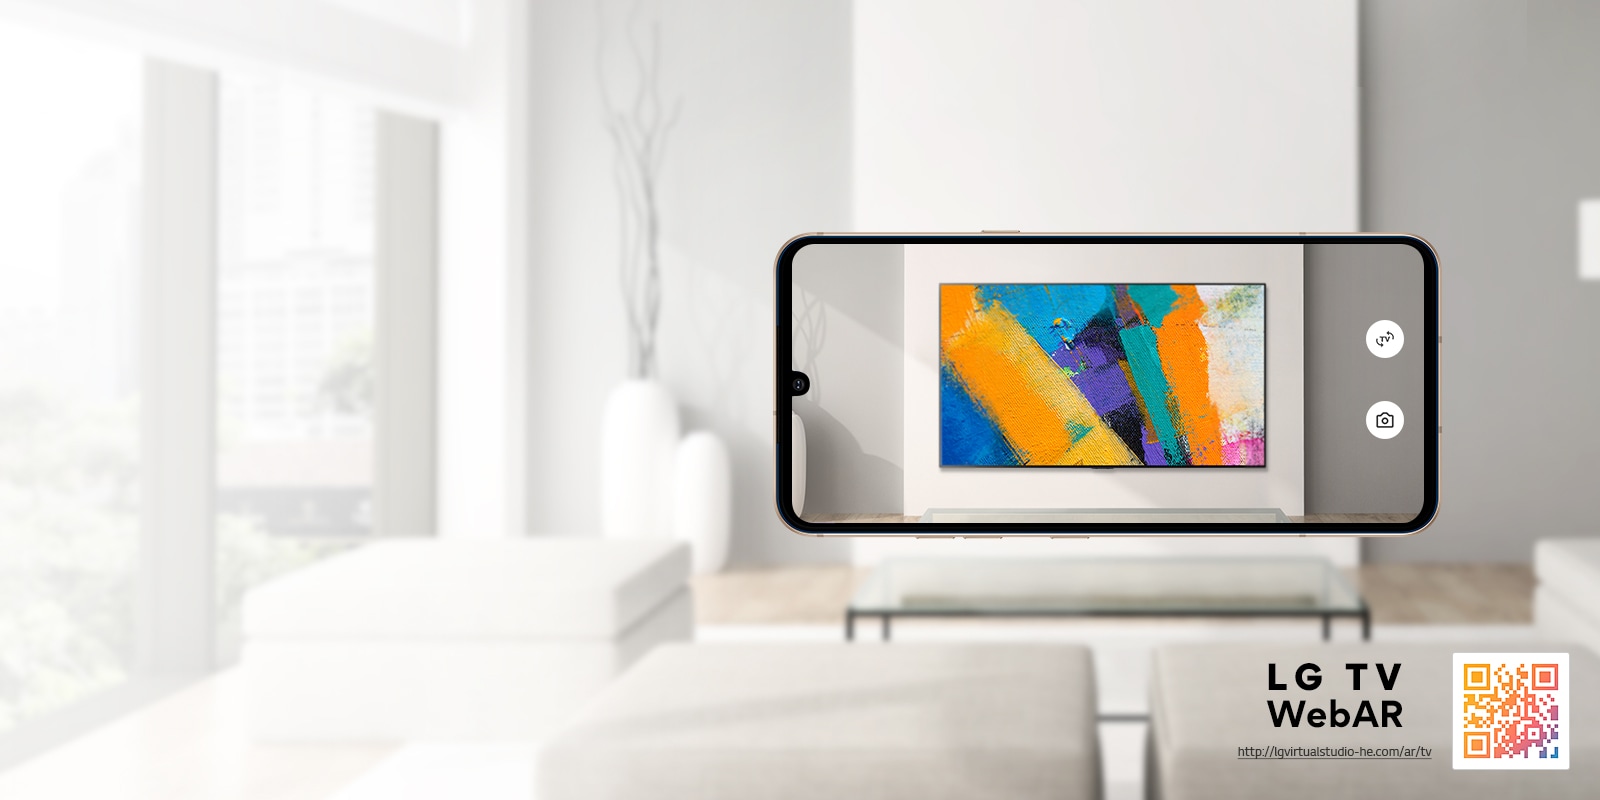 "This is a Web AR simulation image of LG OLED TV. Mobile phone images are overlapped on a minimalist space. There is a QR code at the bottom right."